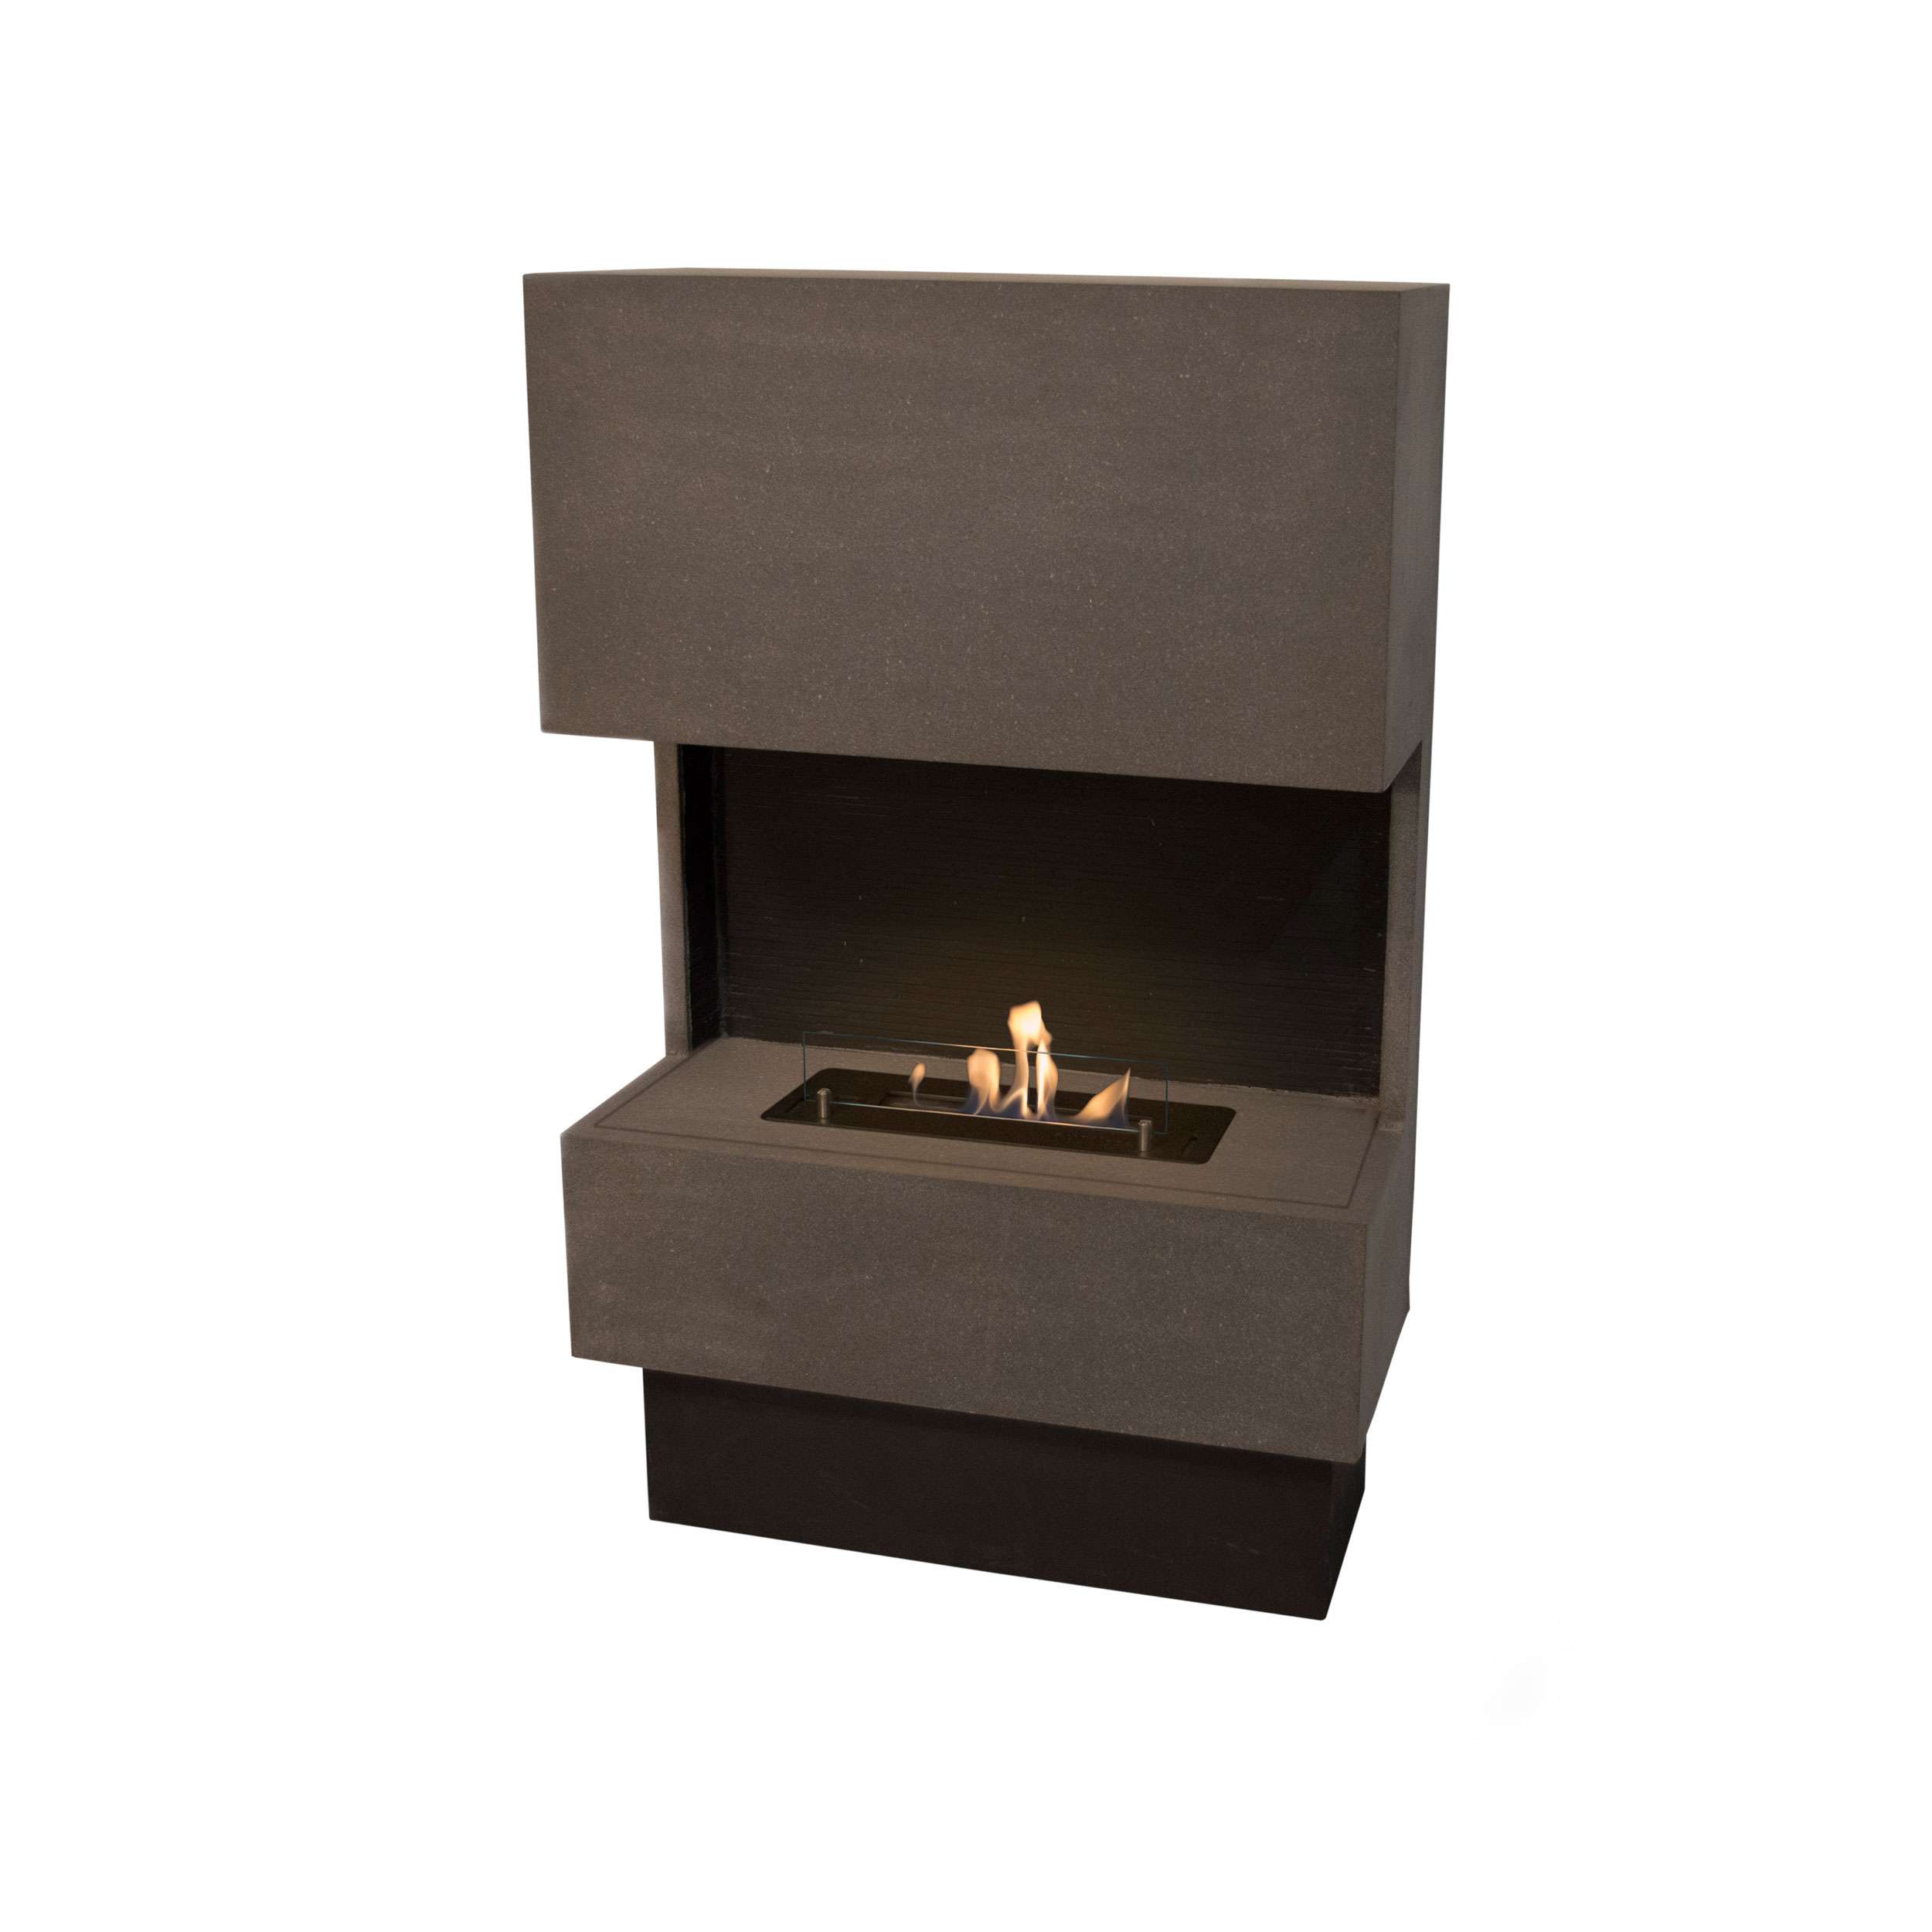 Fireplace Wood for Sale Beautiful Ethanol Kamin Ruby Fires Nuoro